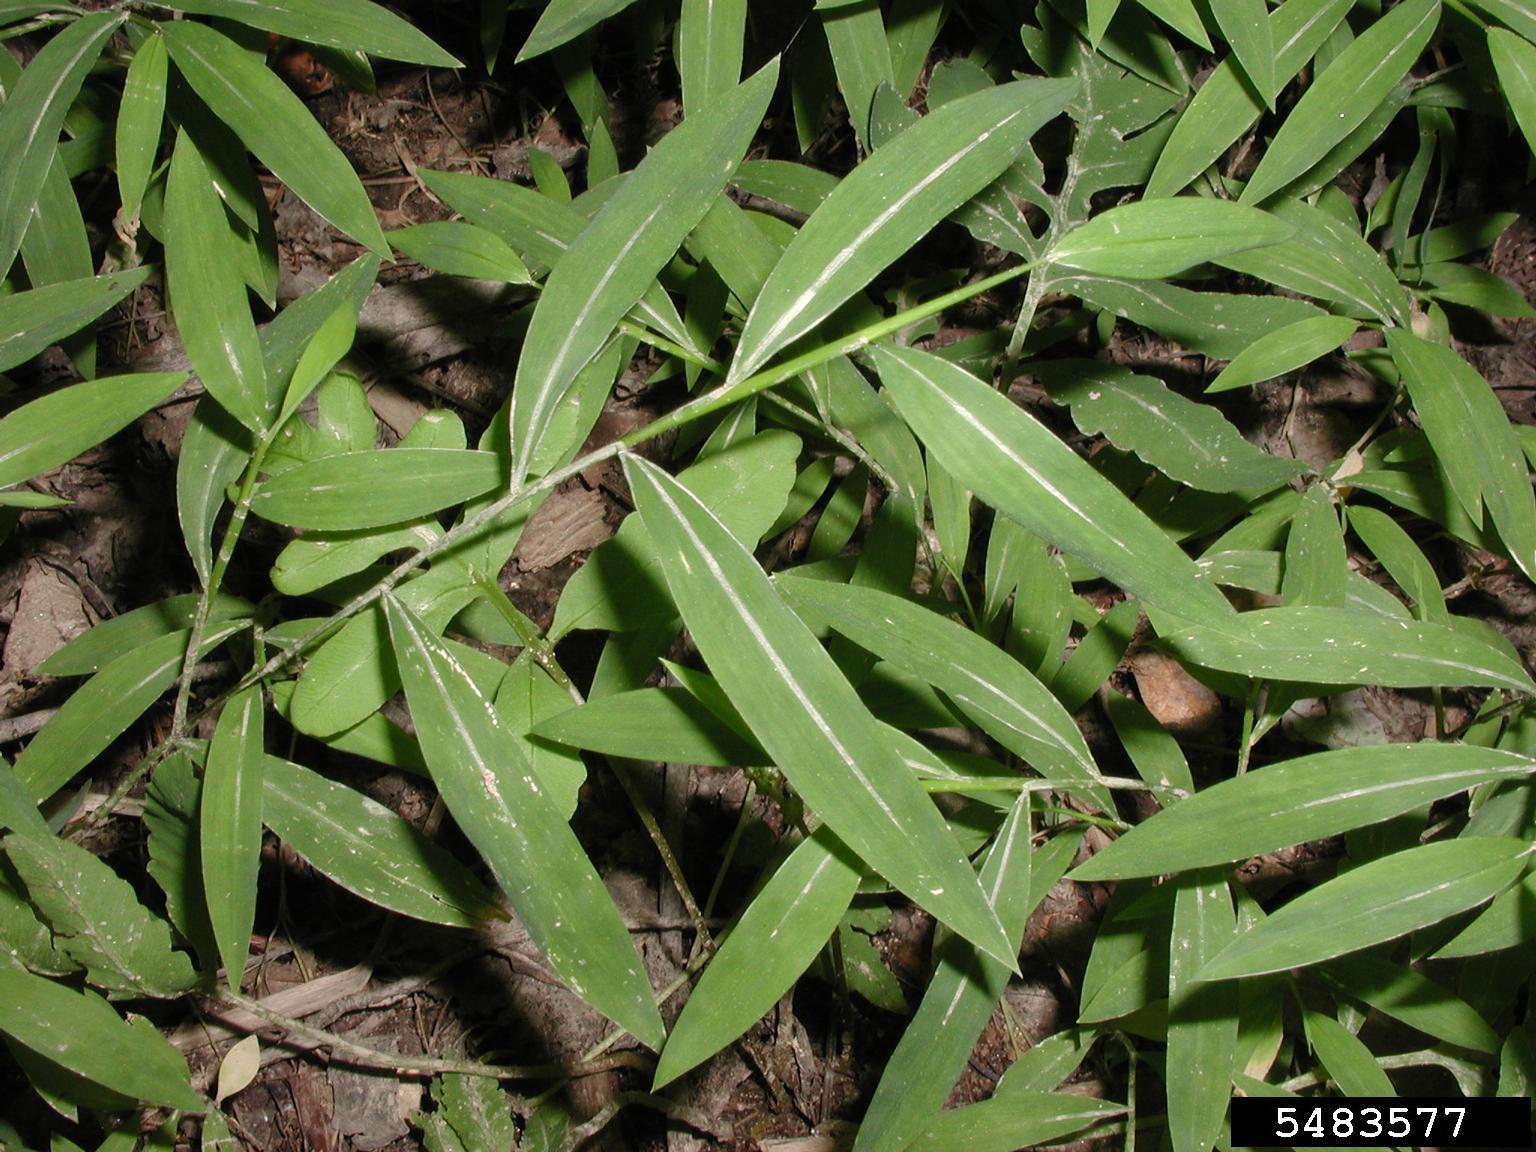 Details of Japanese stiltgrass with white line down the center of leaf blades